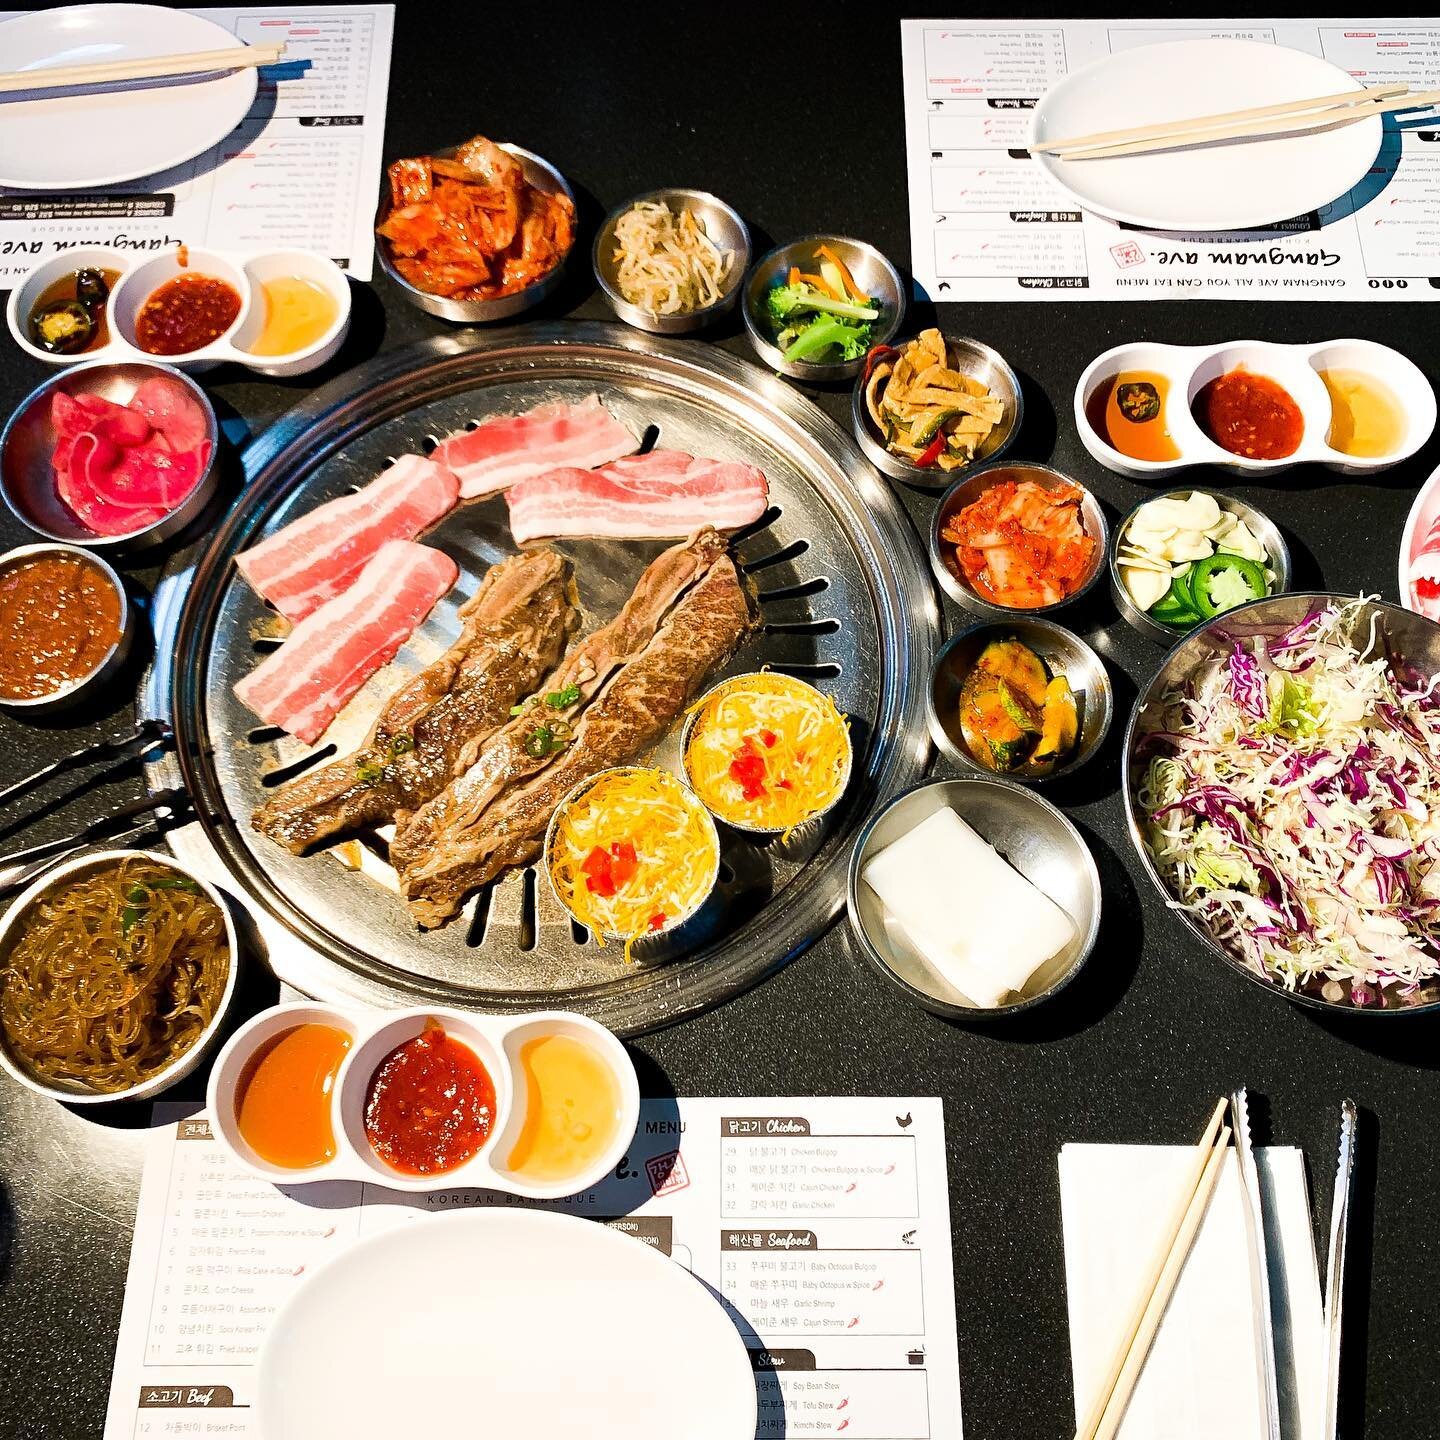 Come and treat yourself with best KBBQ in town. We are now open for lunch on Fridays. 

$5 off Course A for Lunch on Fridays until 9/2. Must mention this post, valid during lunch on Friday only between 12pm and 4pm. Promotion may not exceed $25 per t